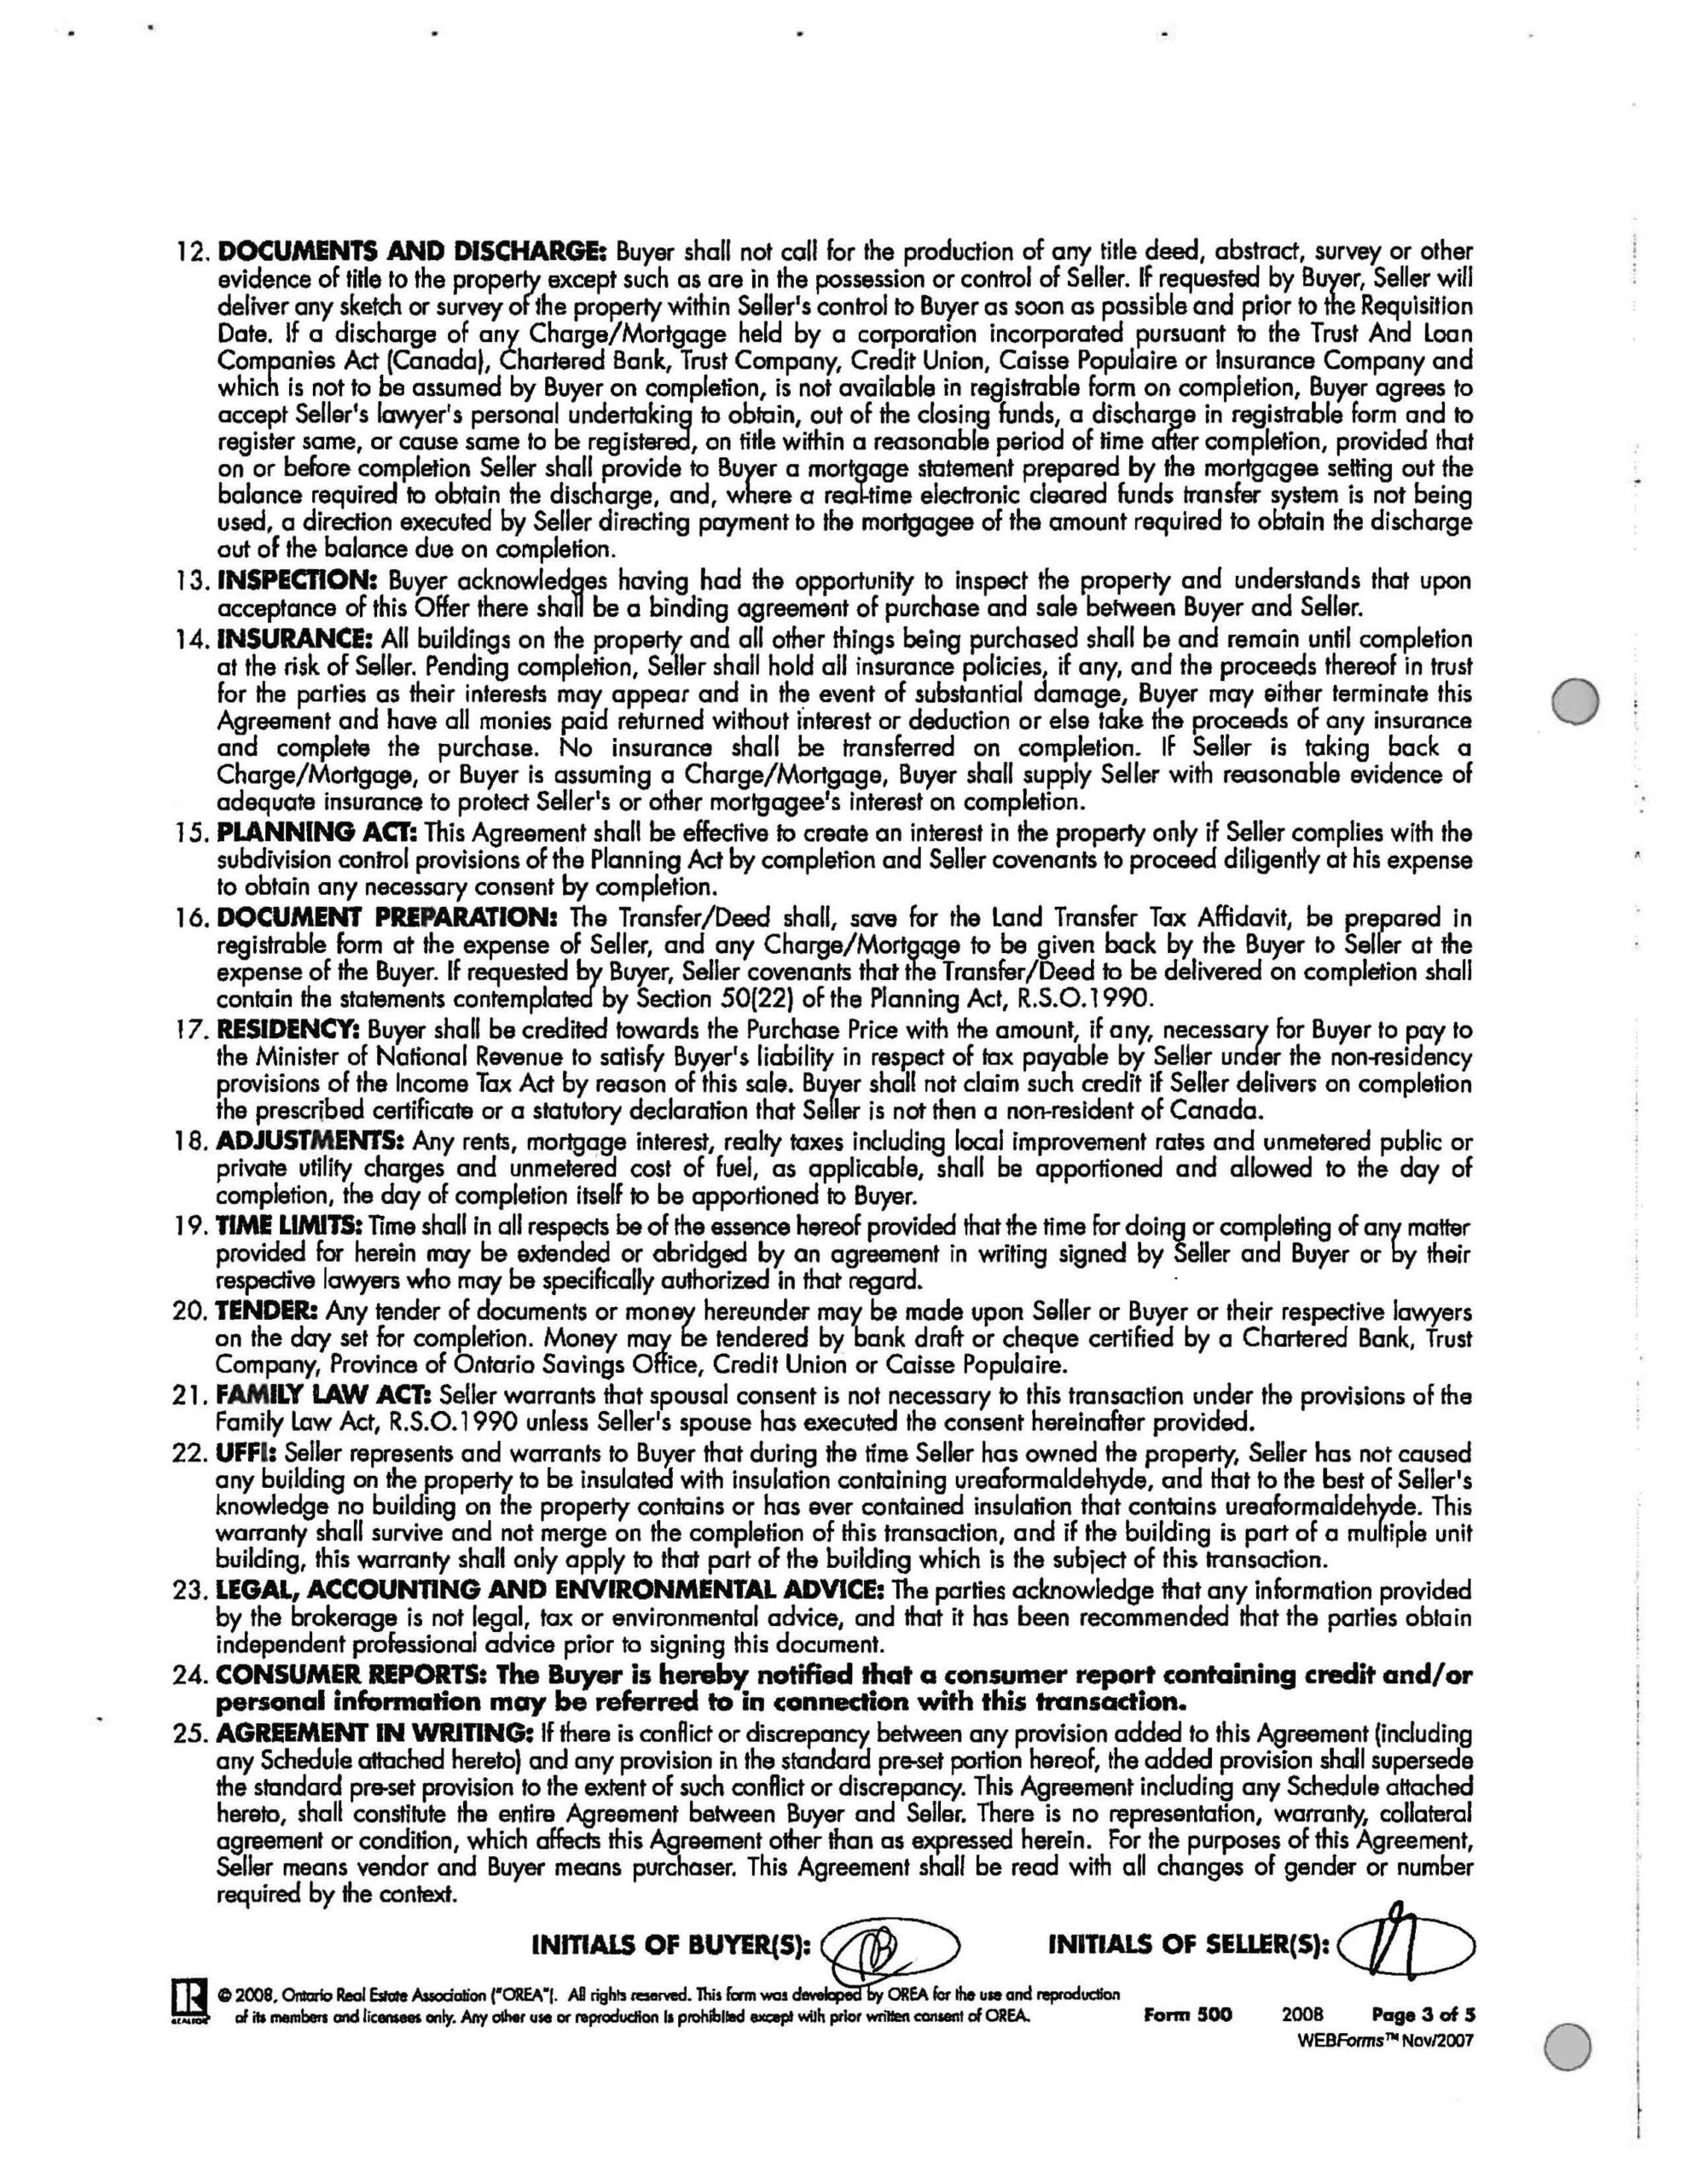 Agreement of Purchase and Sale document page 06